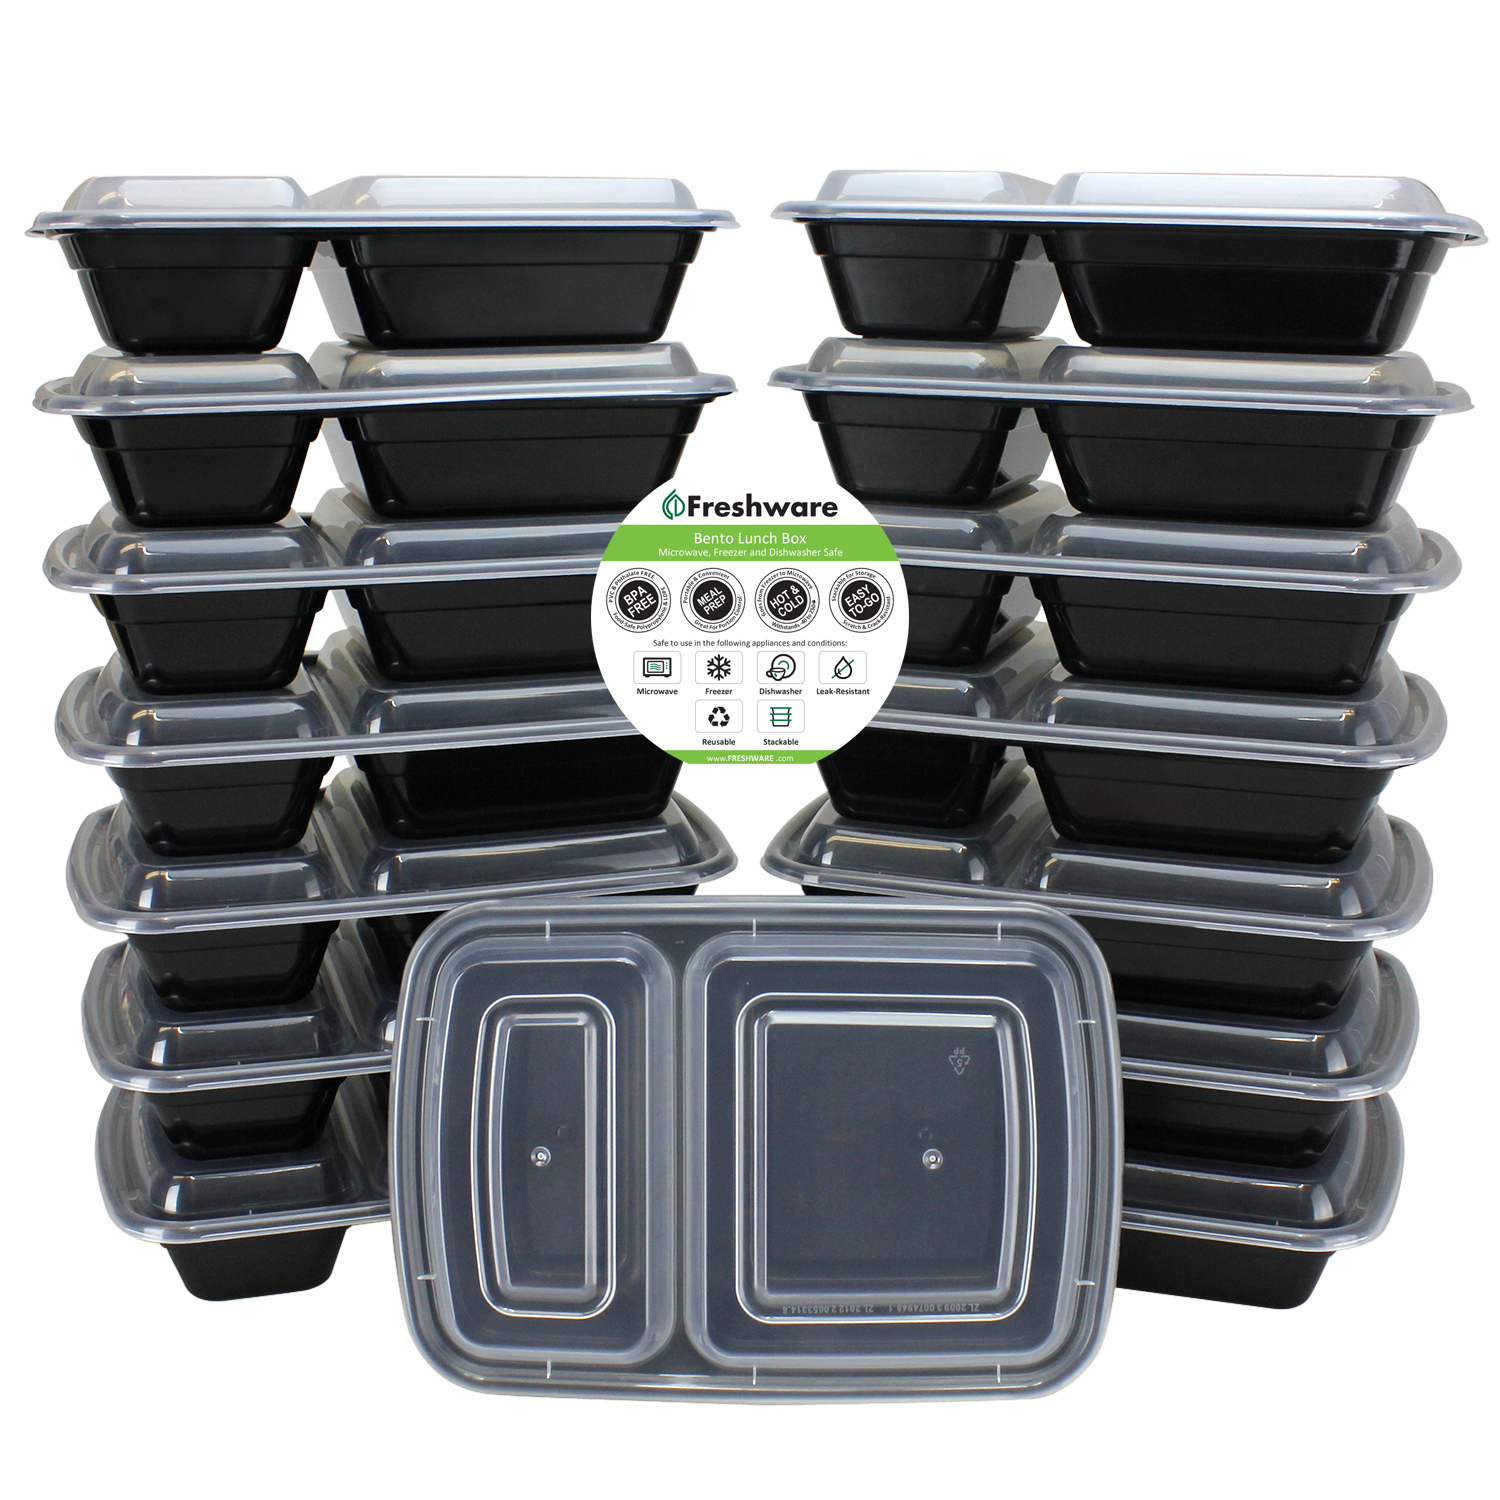 Freshware 15-Pack 2 Compartment Bento Lunch Boxes with Lids - Meal Prep, Portion Control, 21 Day Fix & Food Storage Containers (25oz)